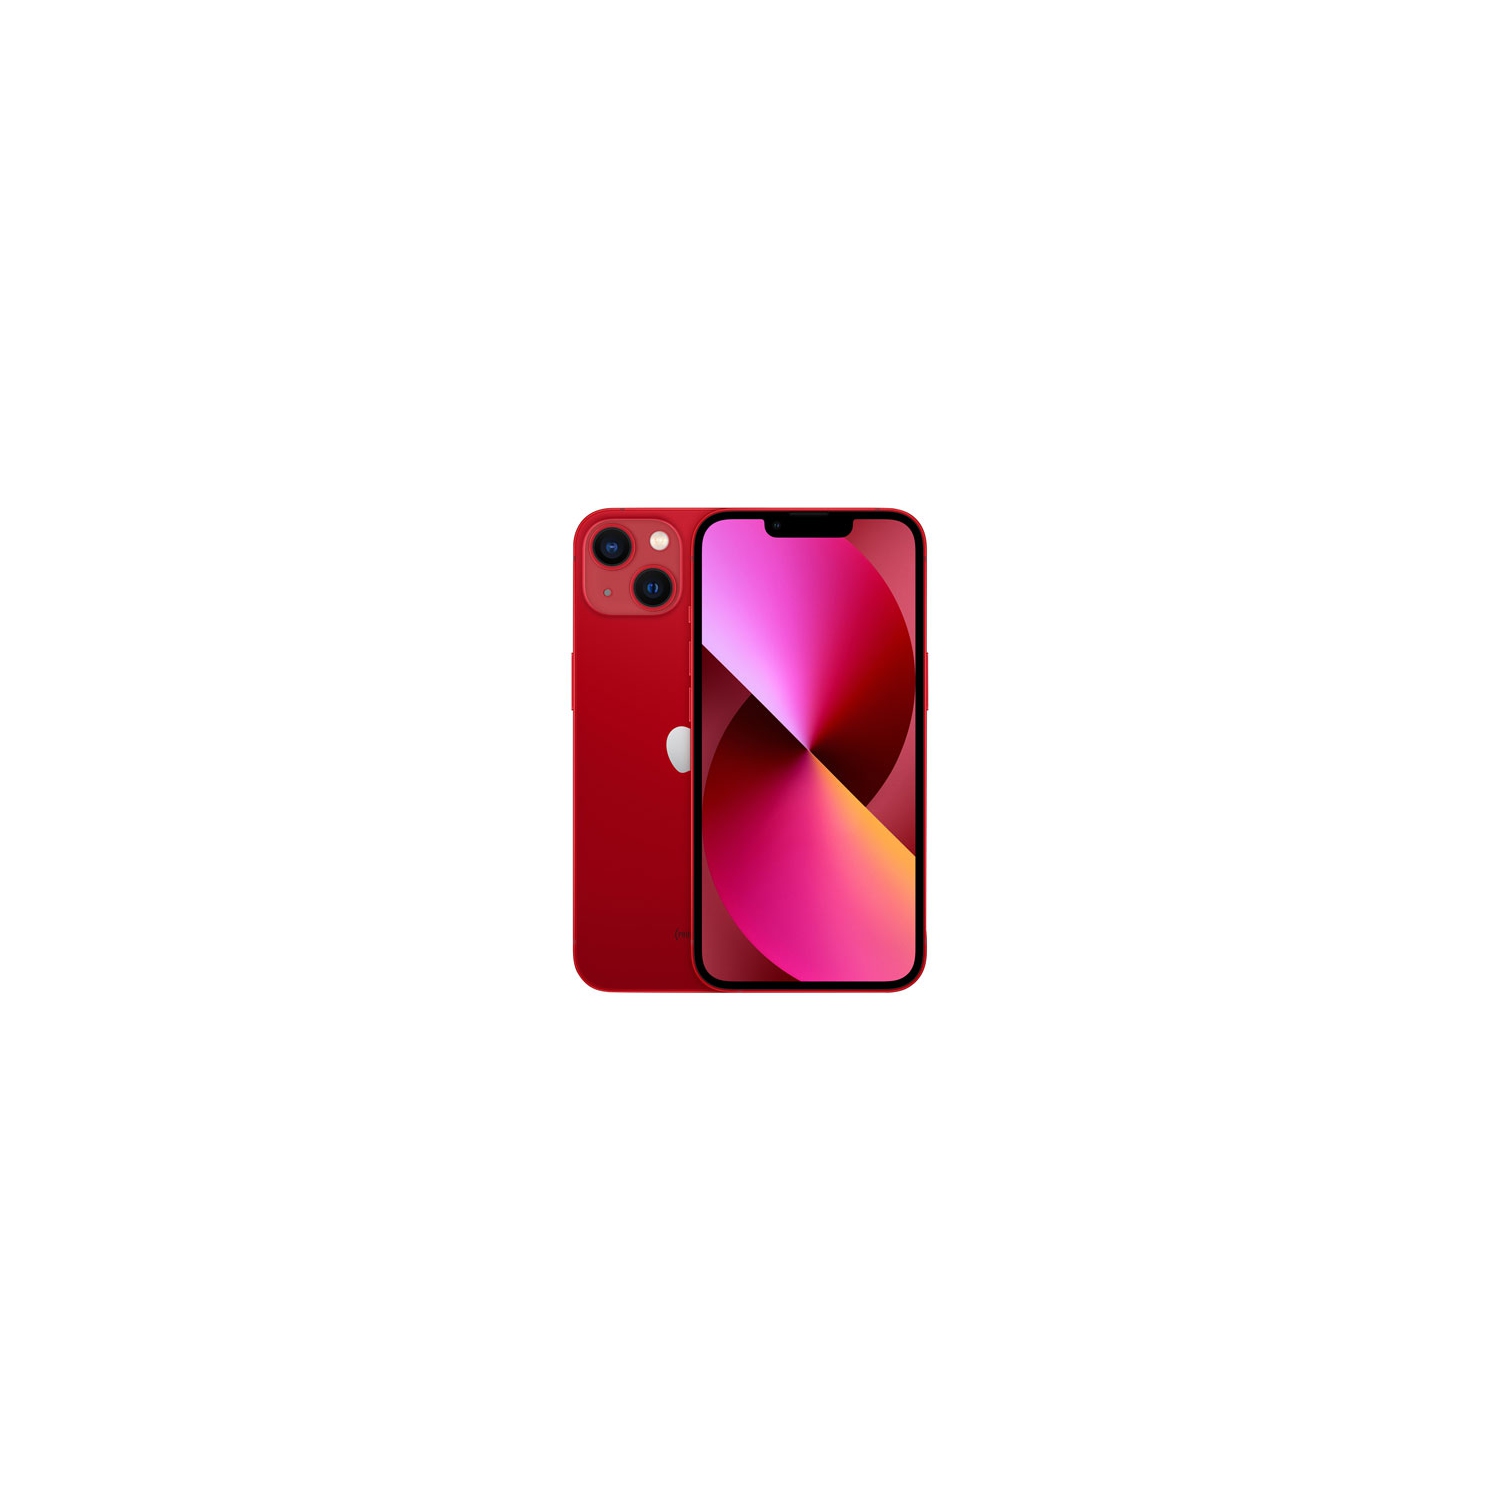 Refurbished (Good) - Apple iPhone 13 128GB - (PRODUCT)RED - Unlocked